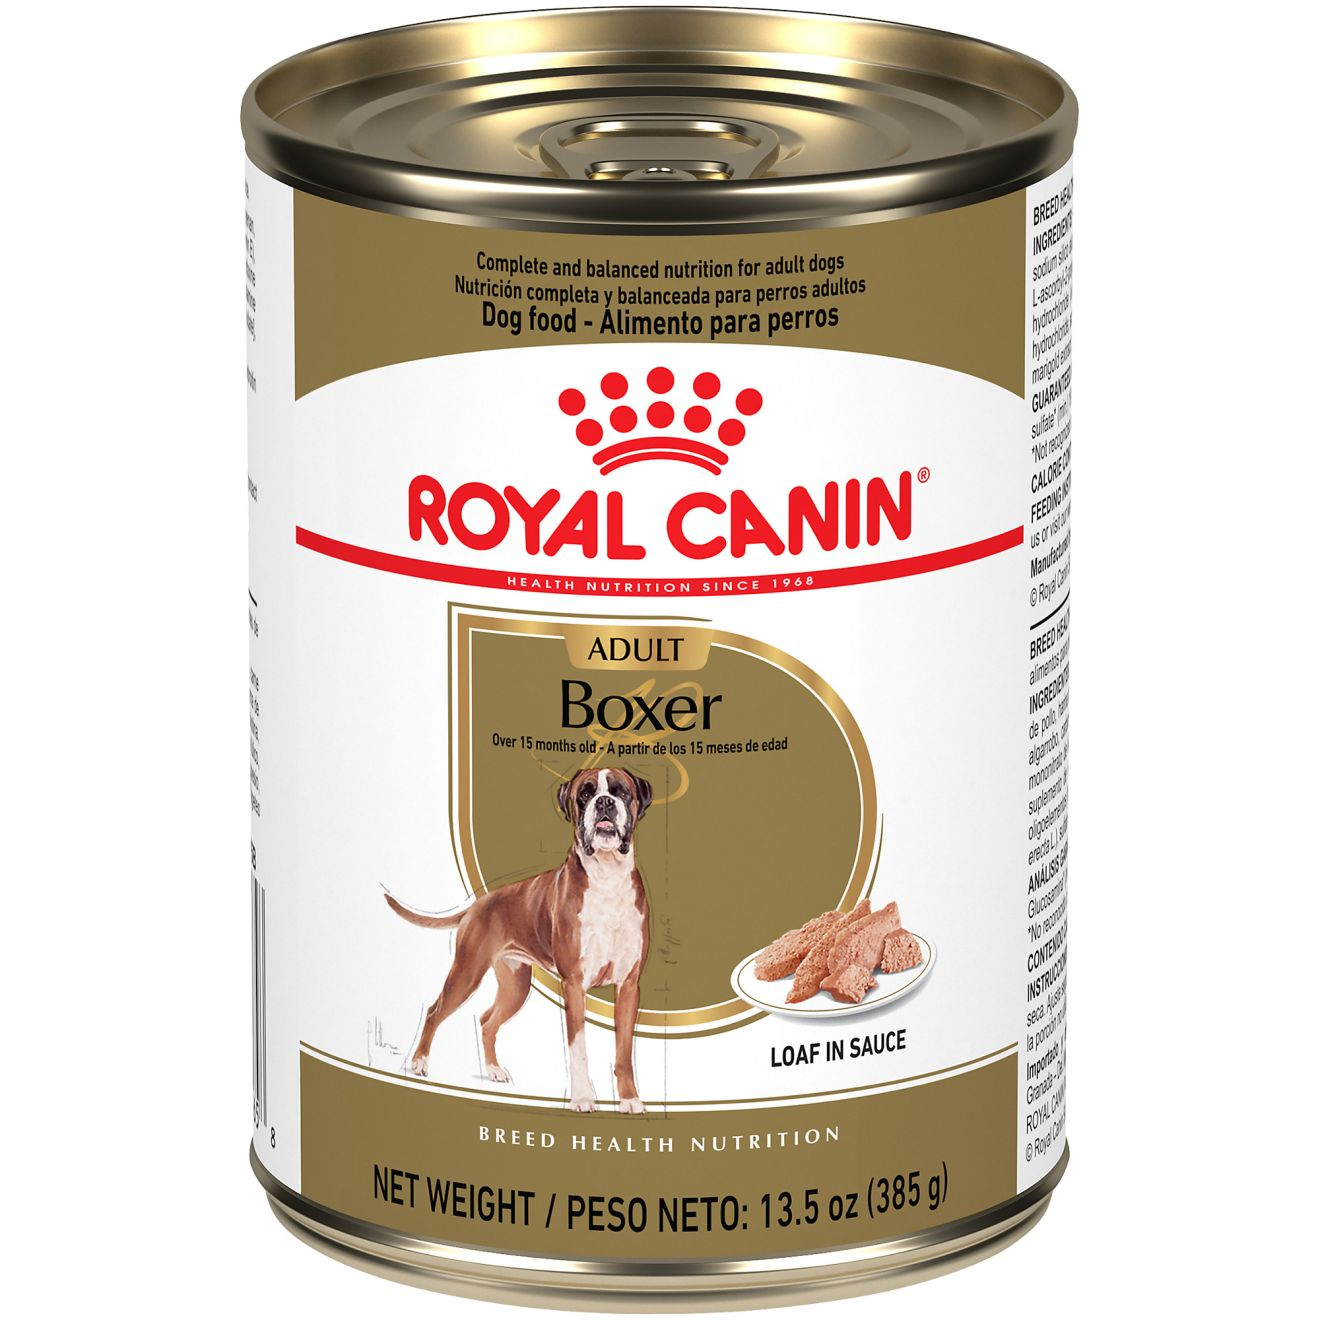 Boxer Adult Loaf in Sauce Canned Dog Food